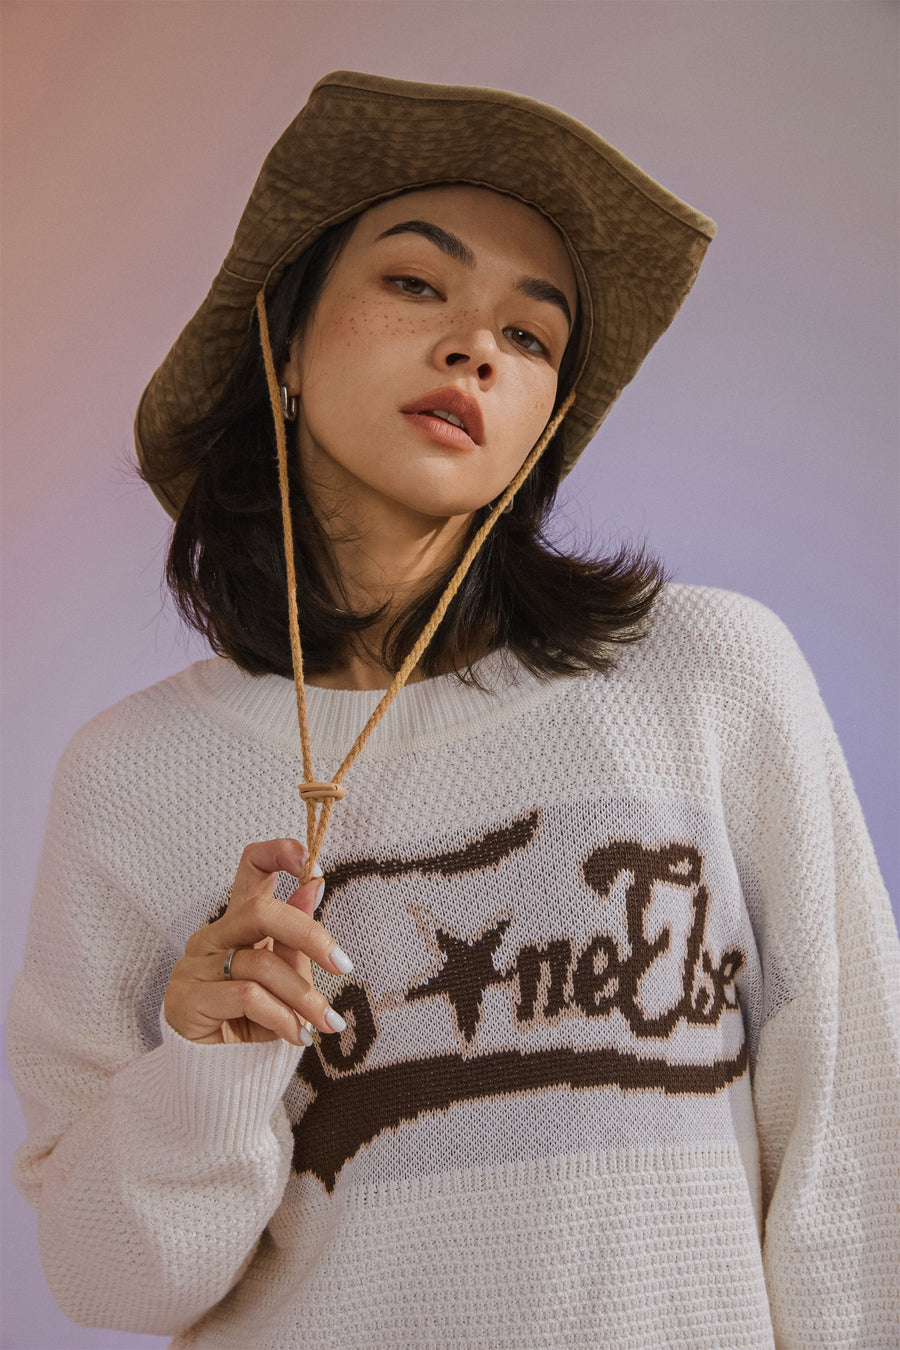 No One Else Star Oversized Knit Sweater